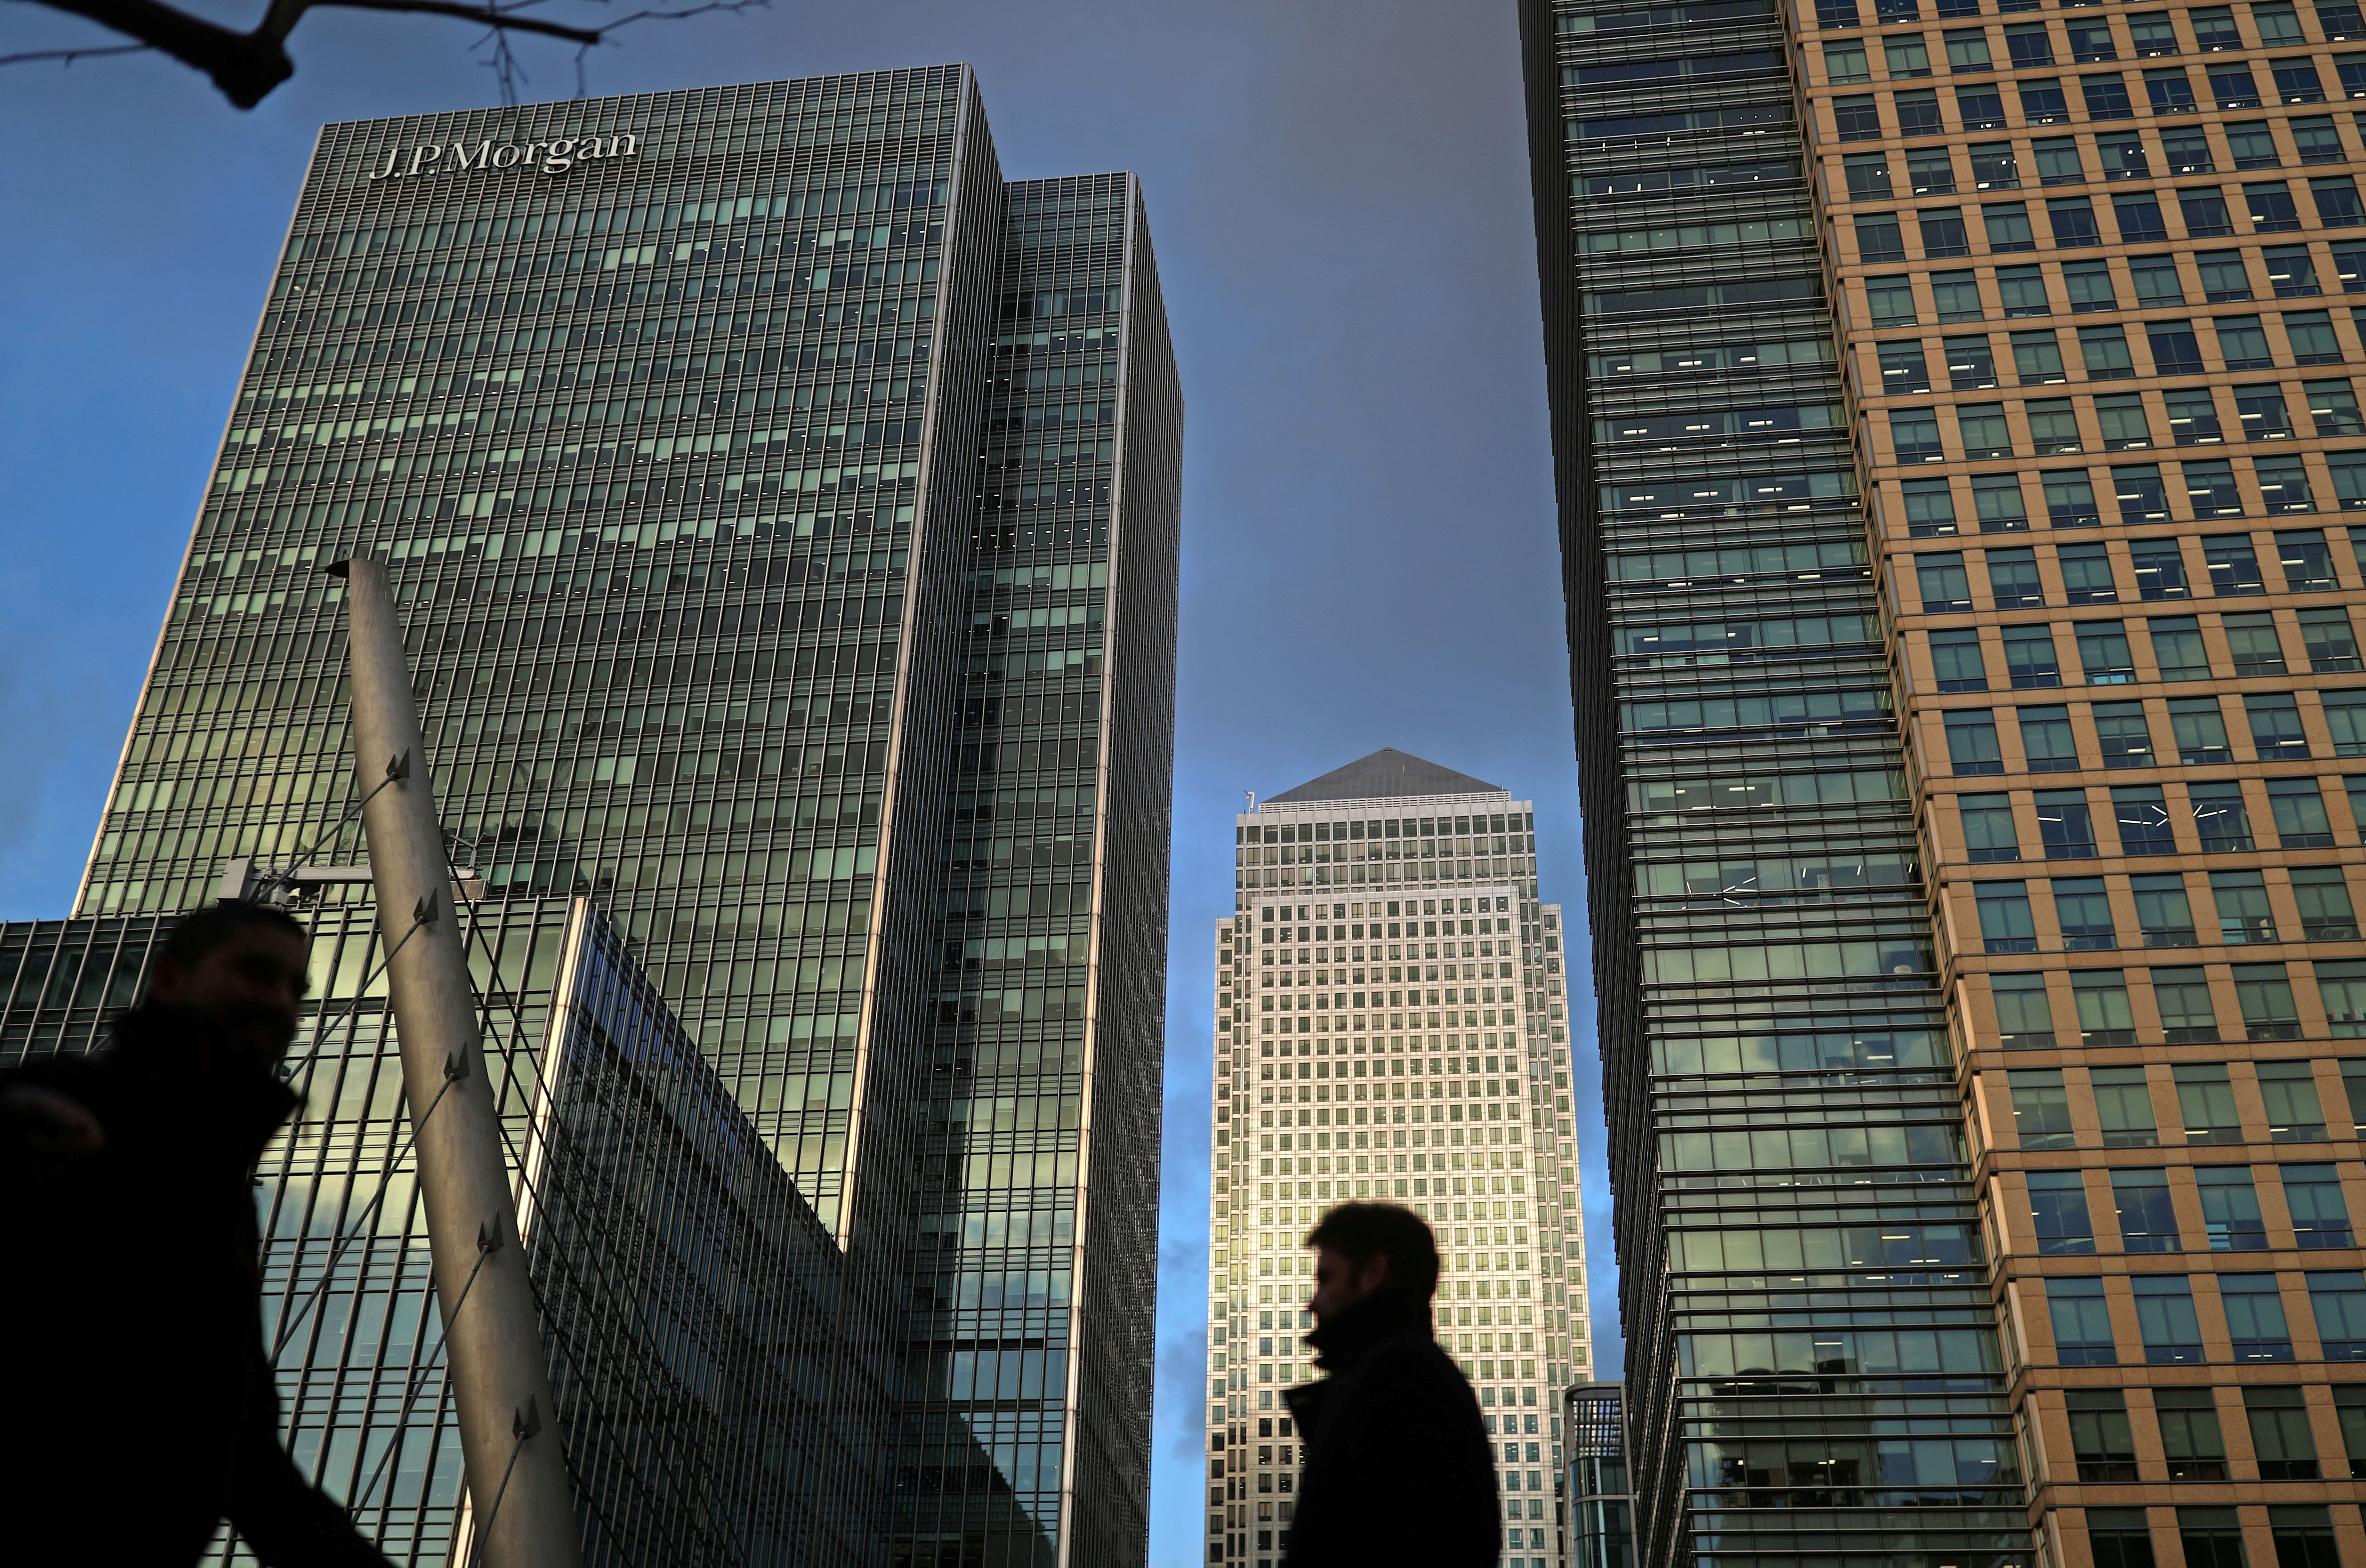 People walk through the Canary Wharf financial district of London